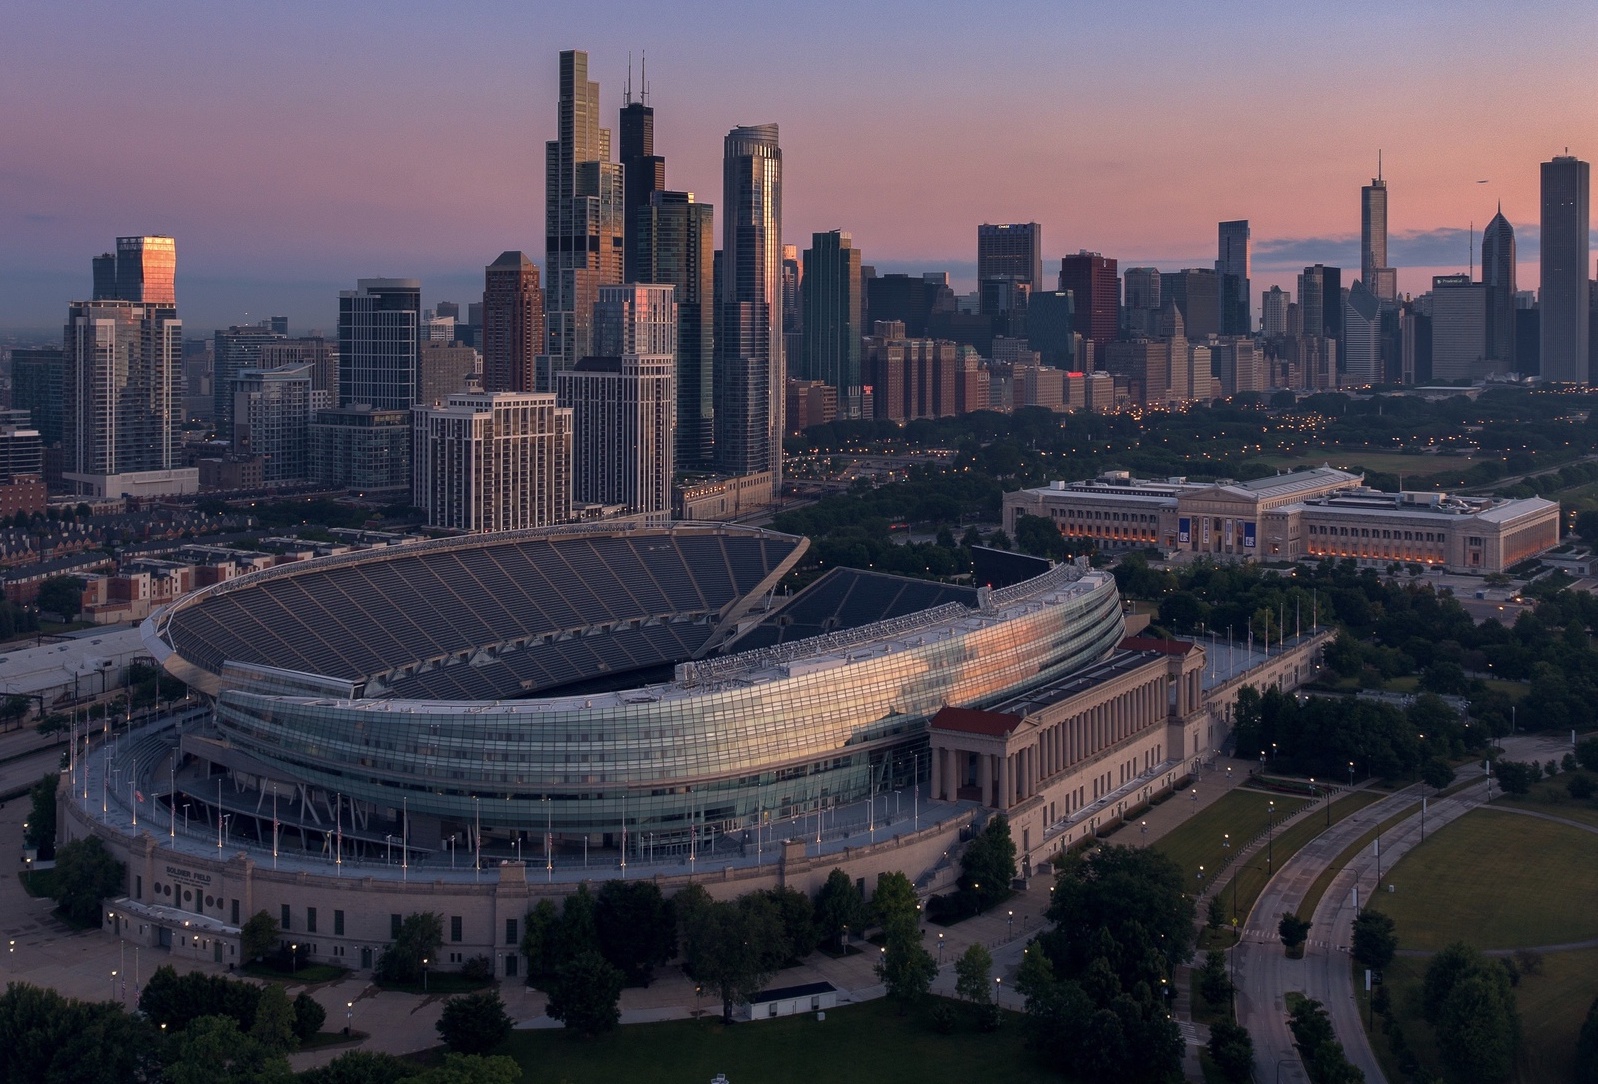 Chicago Bears Soldier Field